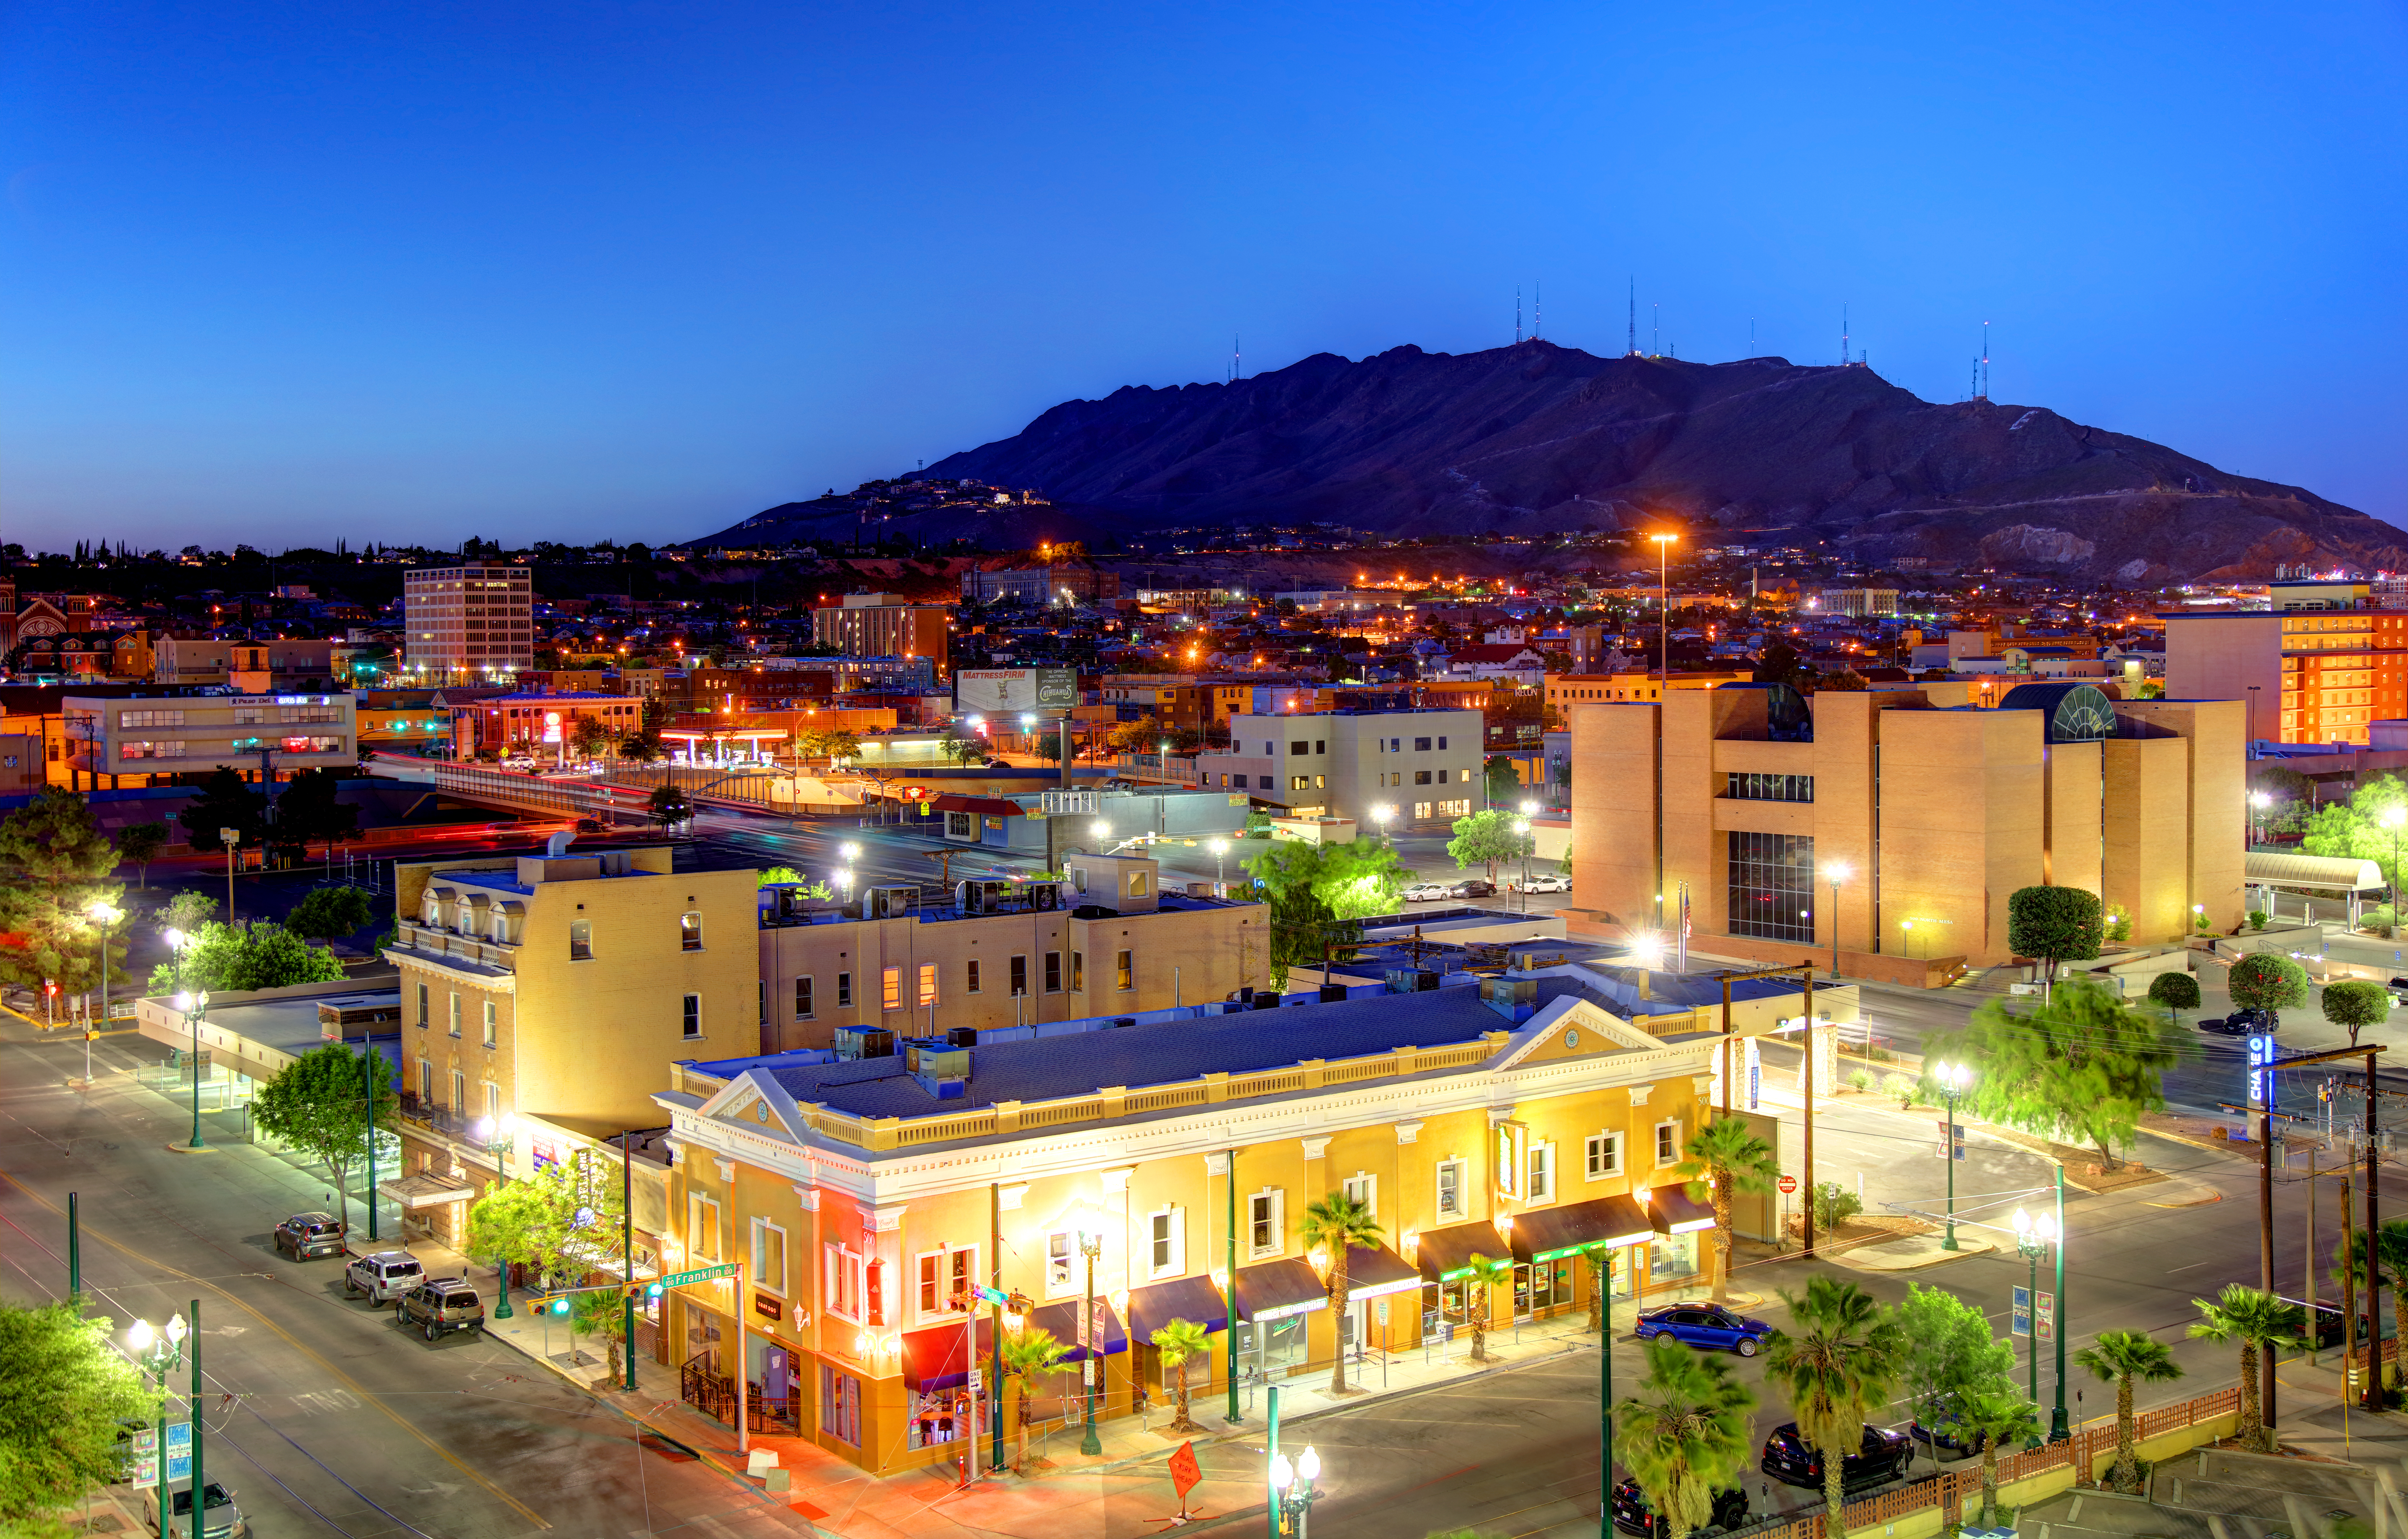 10 Things You Didn’t Know About El Paso